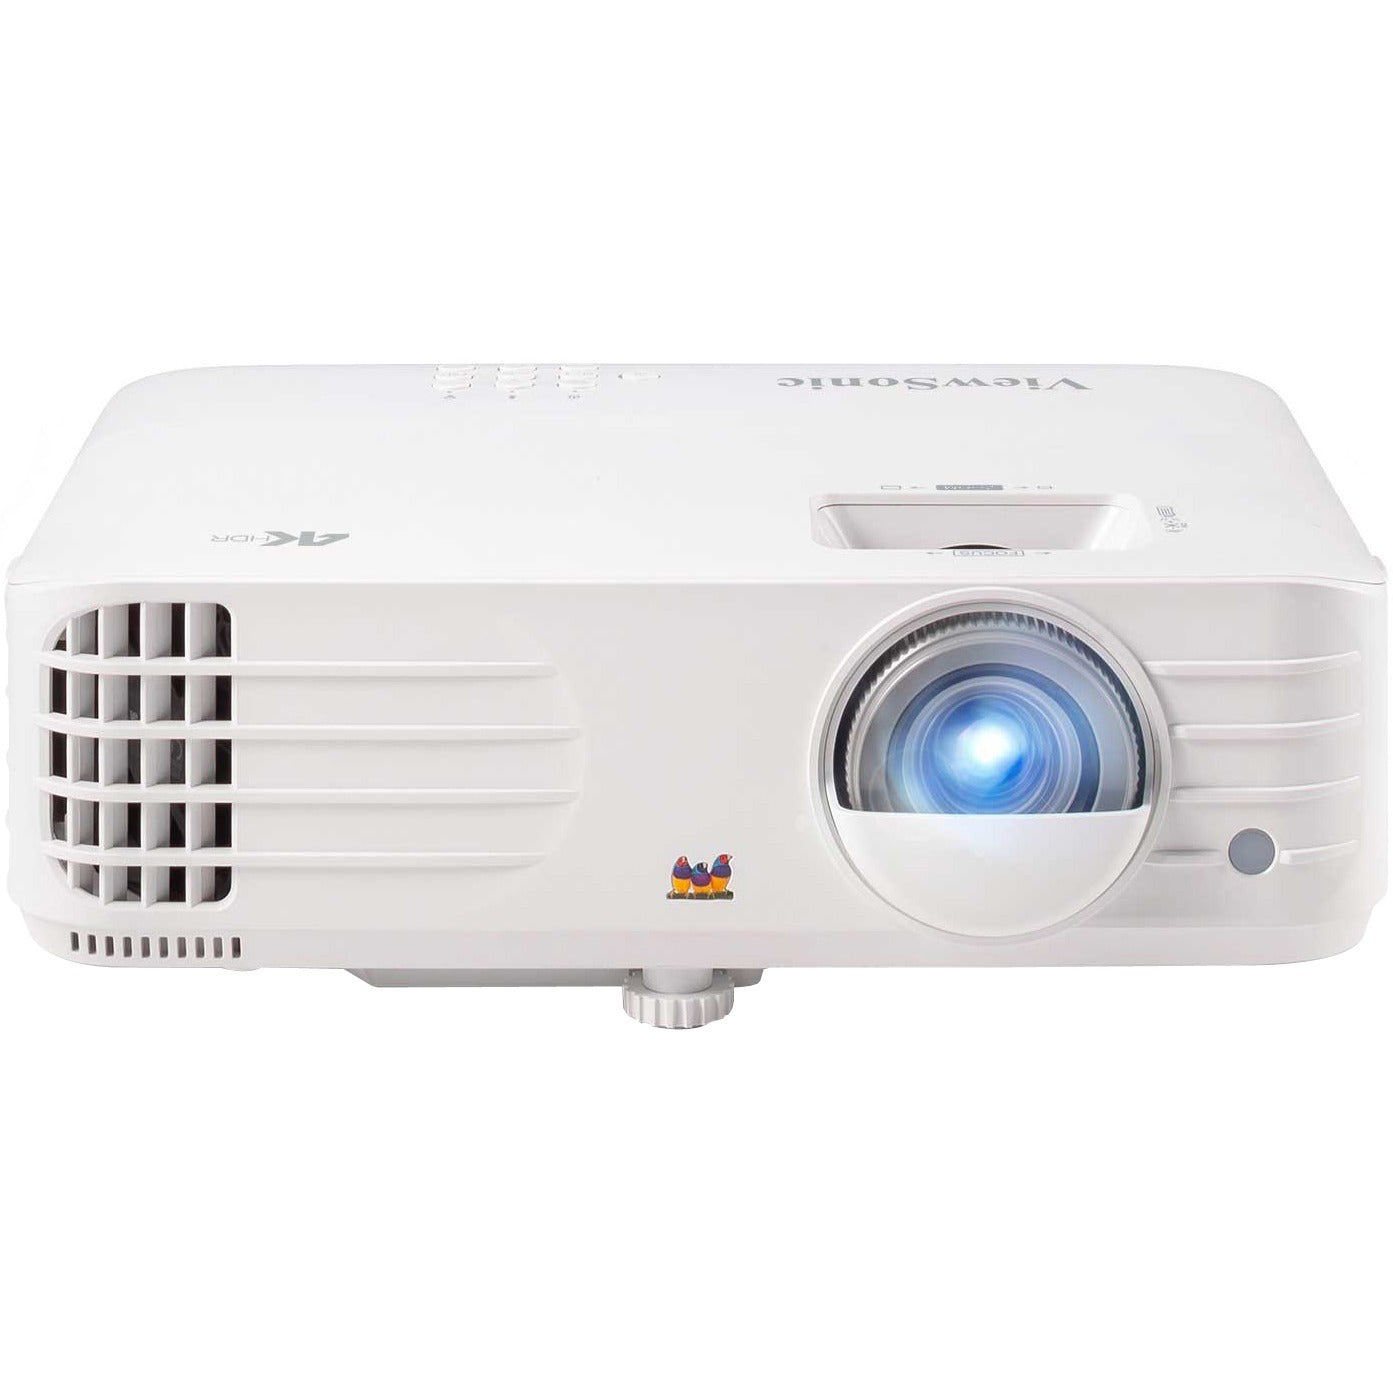 viewsonic-px701-4k-4k-uhd-3200-lumens-240hz-42ms-home-theater-projector-with-hdr-auto-keystone-dual-hdmi-sports-and-netflix-streaming-with-dongle-on-up-to-300-screen-px701-4k-3200-lumens-4k-uhd-240hz-42ms-home-theater-projector-hdr-auto-ke_vewpx7014k - 2